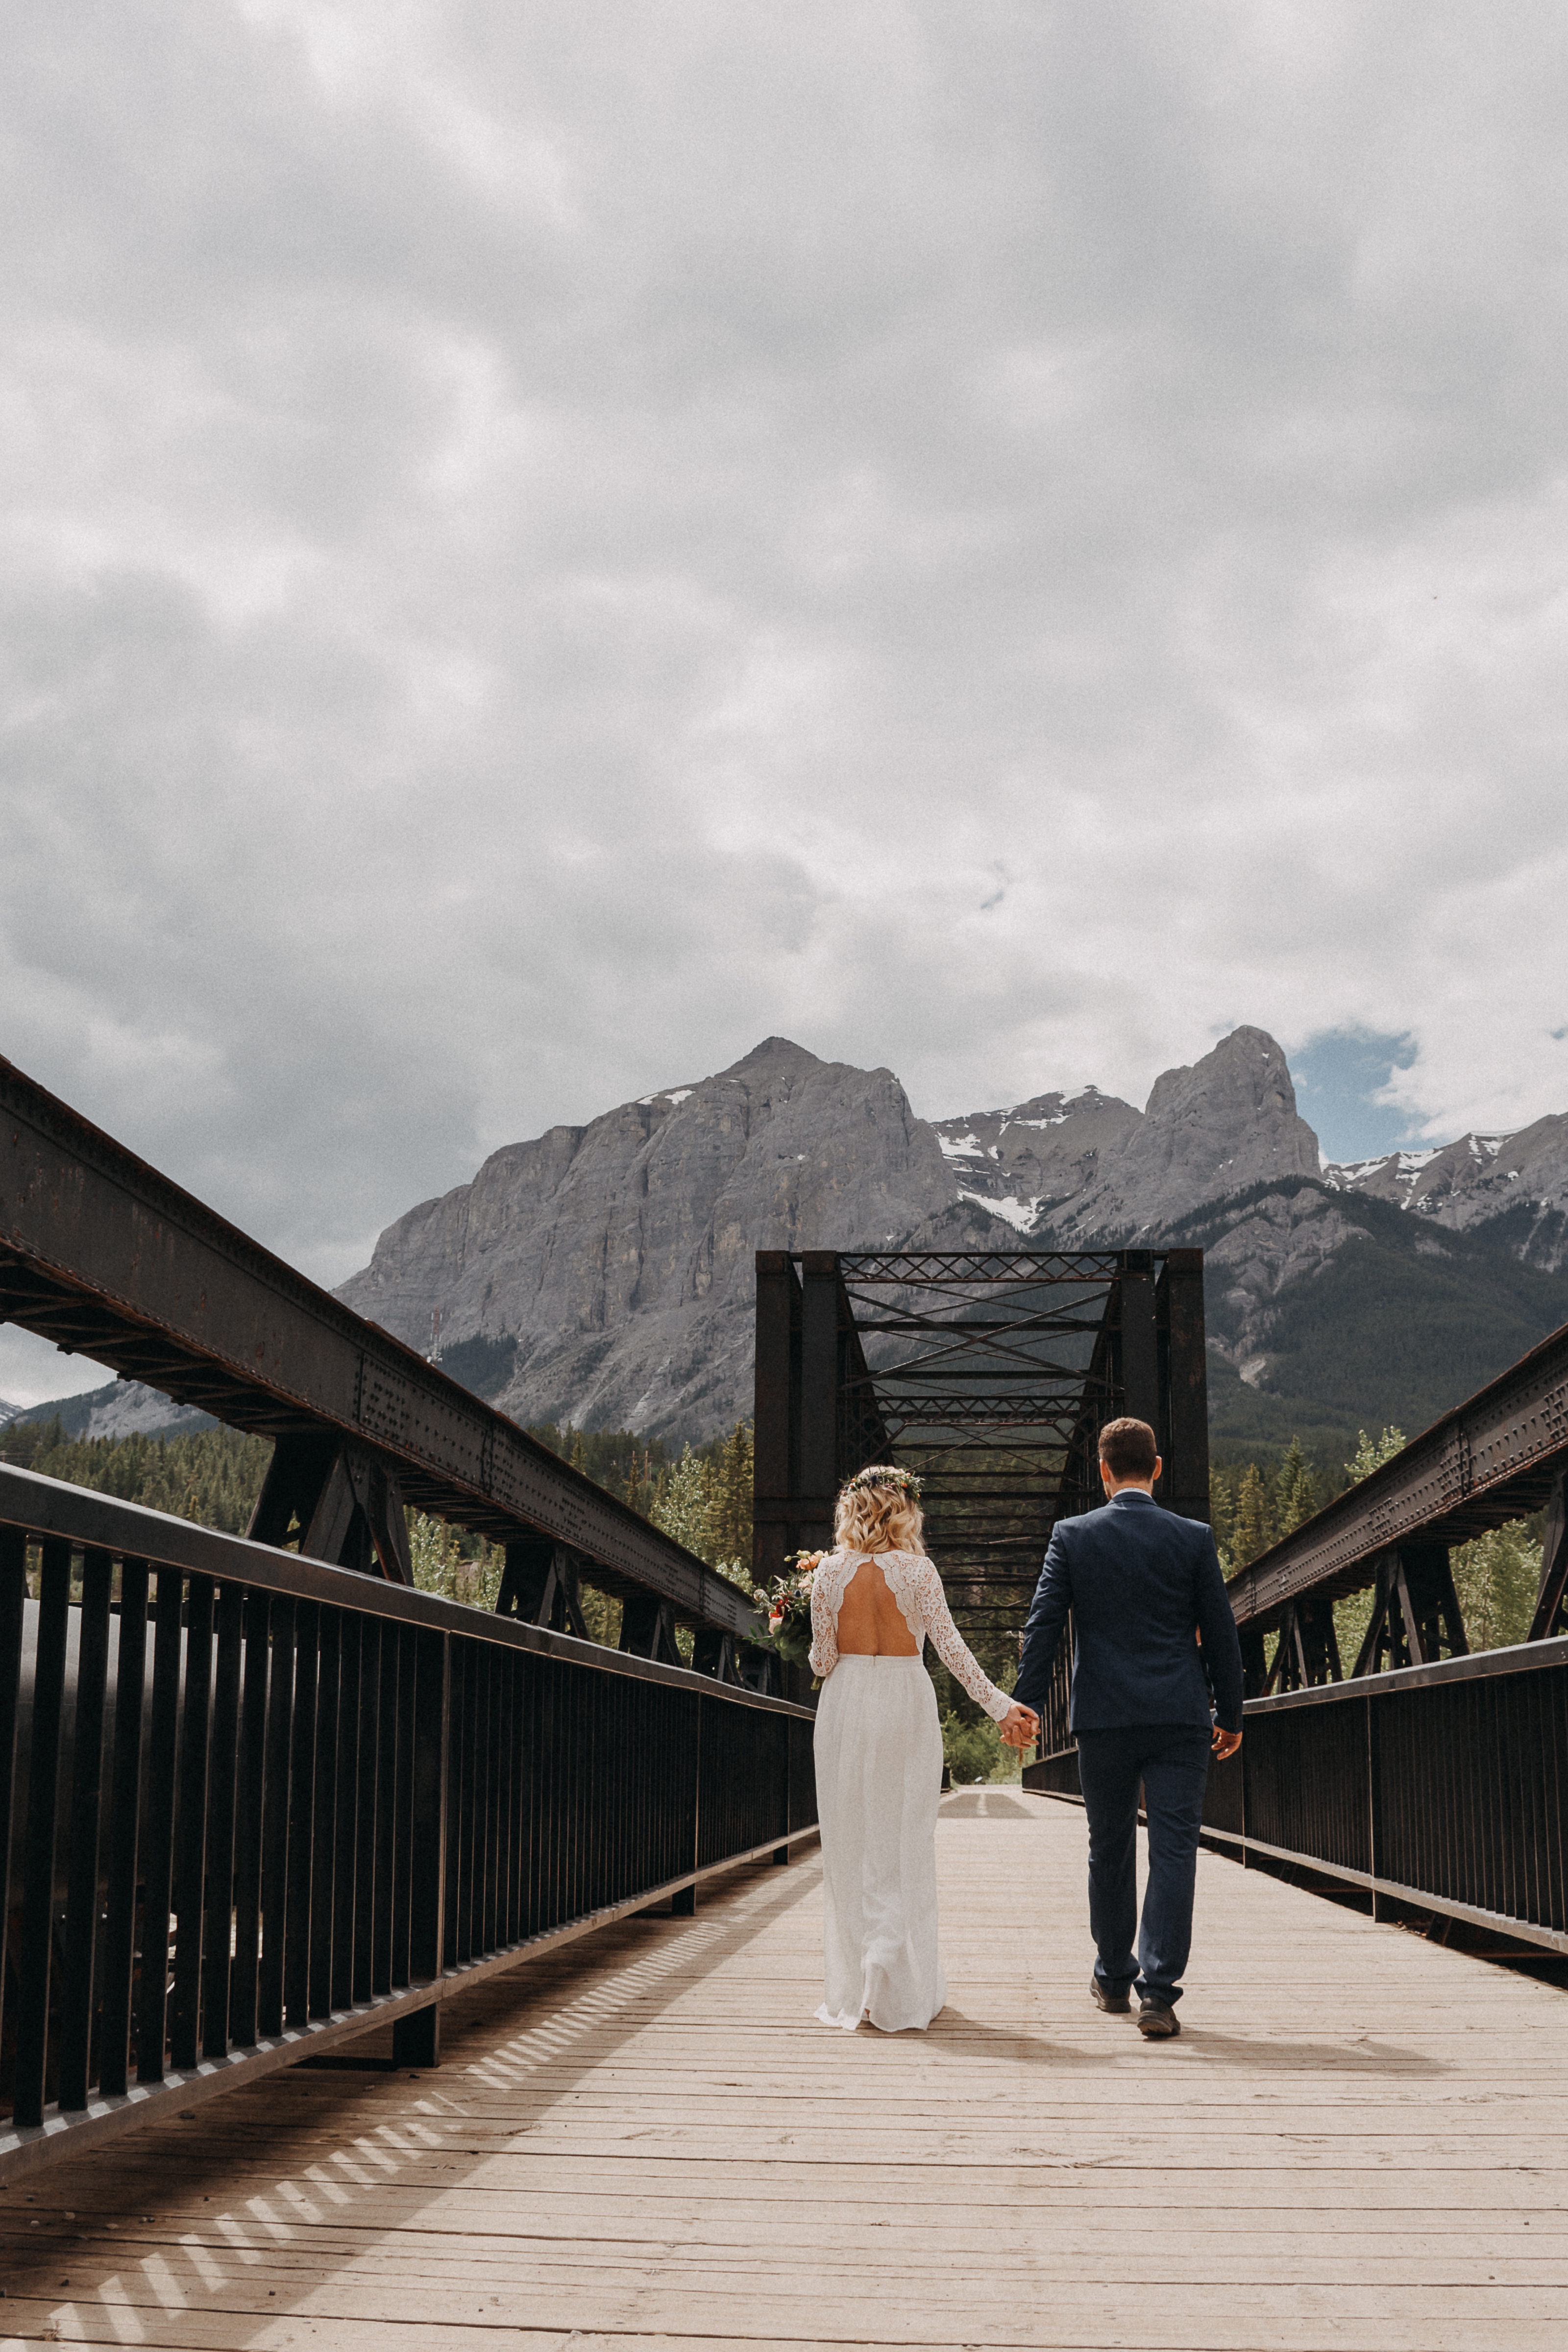 The bride and groom walking away from the camera, hand in hand, on the engine bridge in Canmore, Alberta